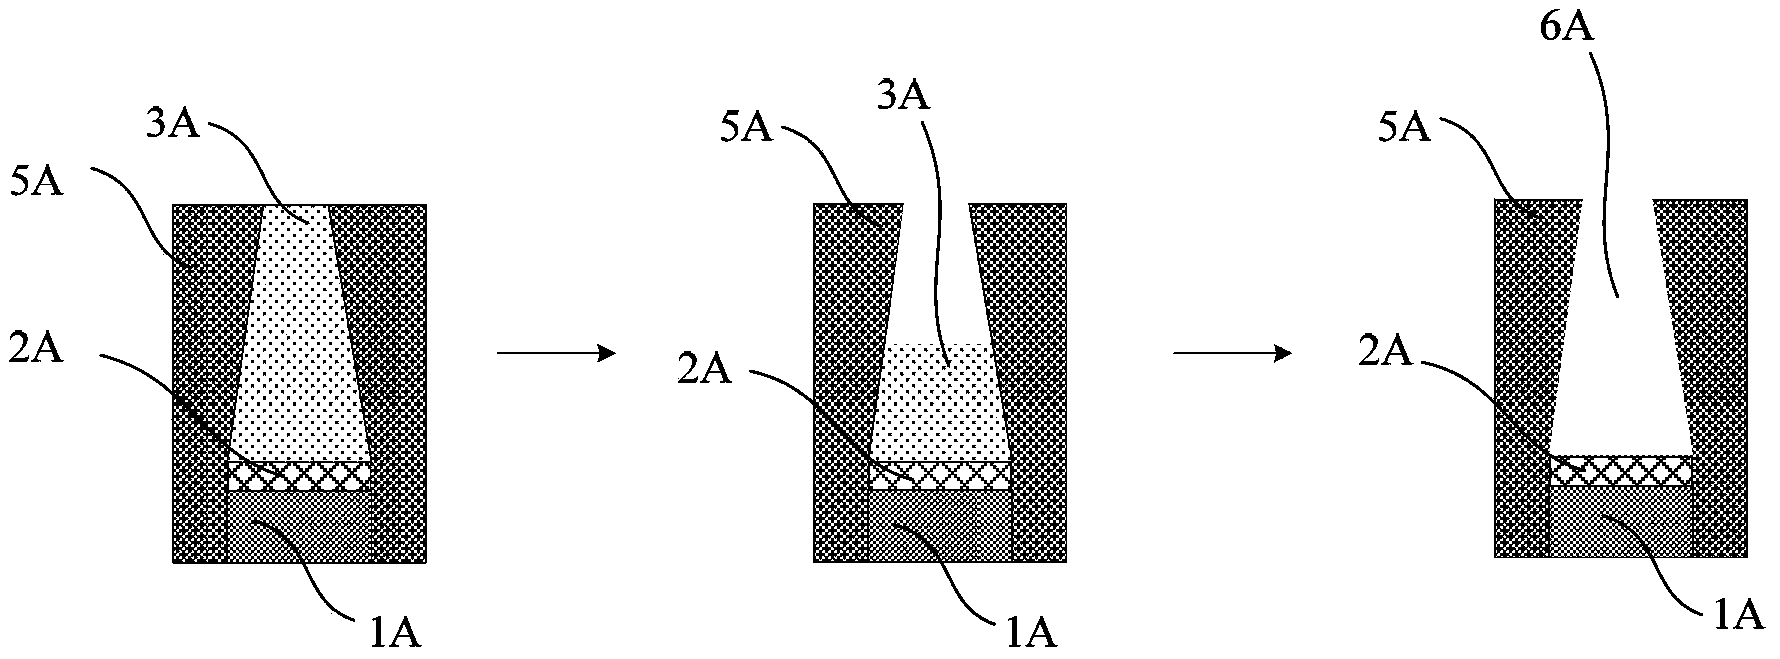 Process method for reducing floating gate holes